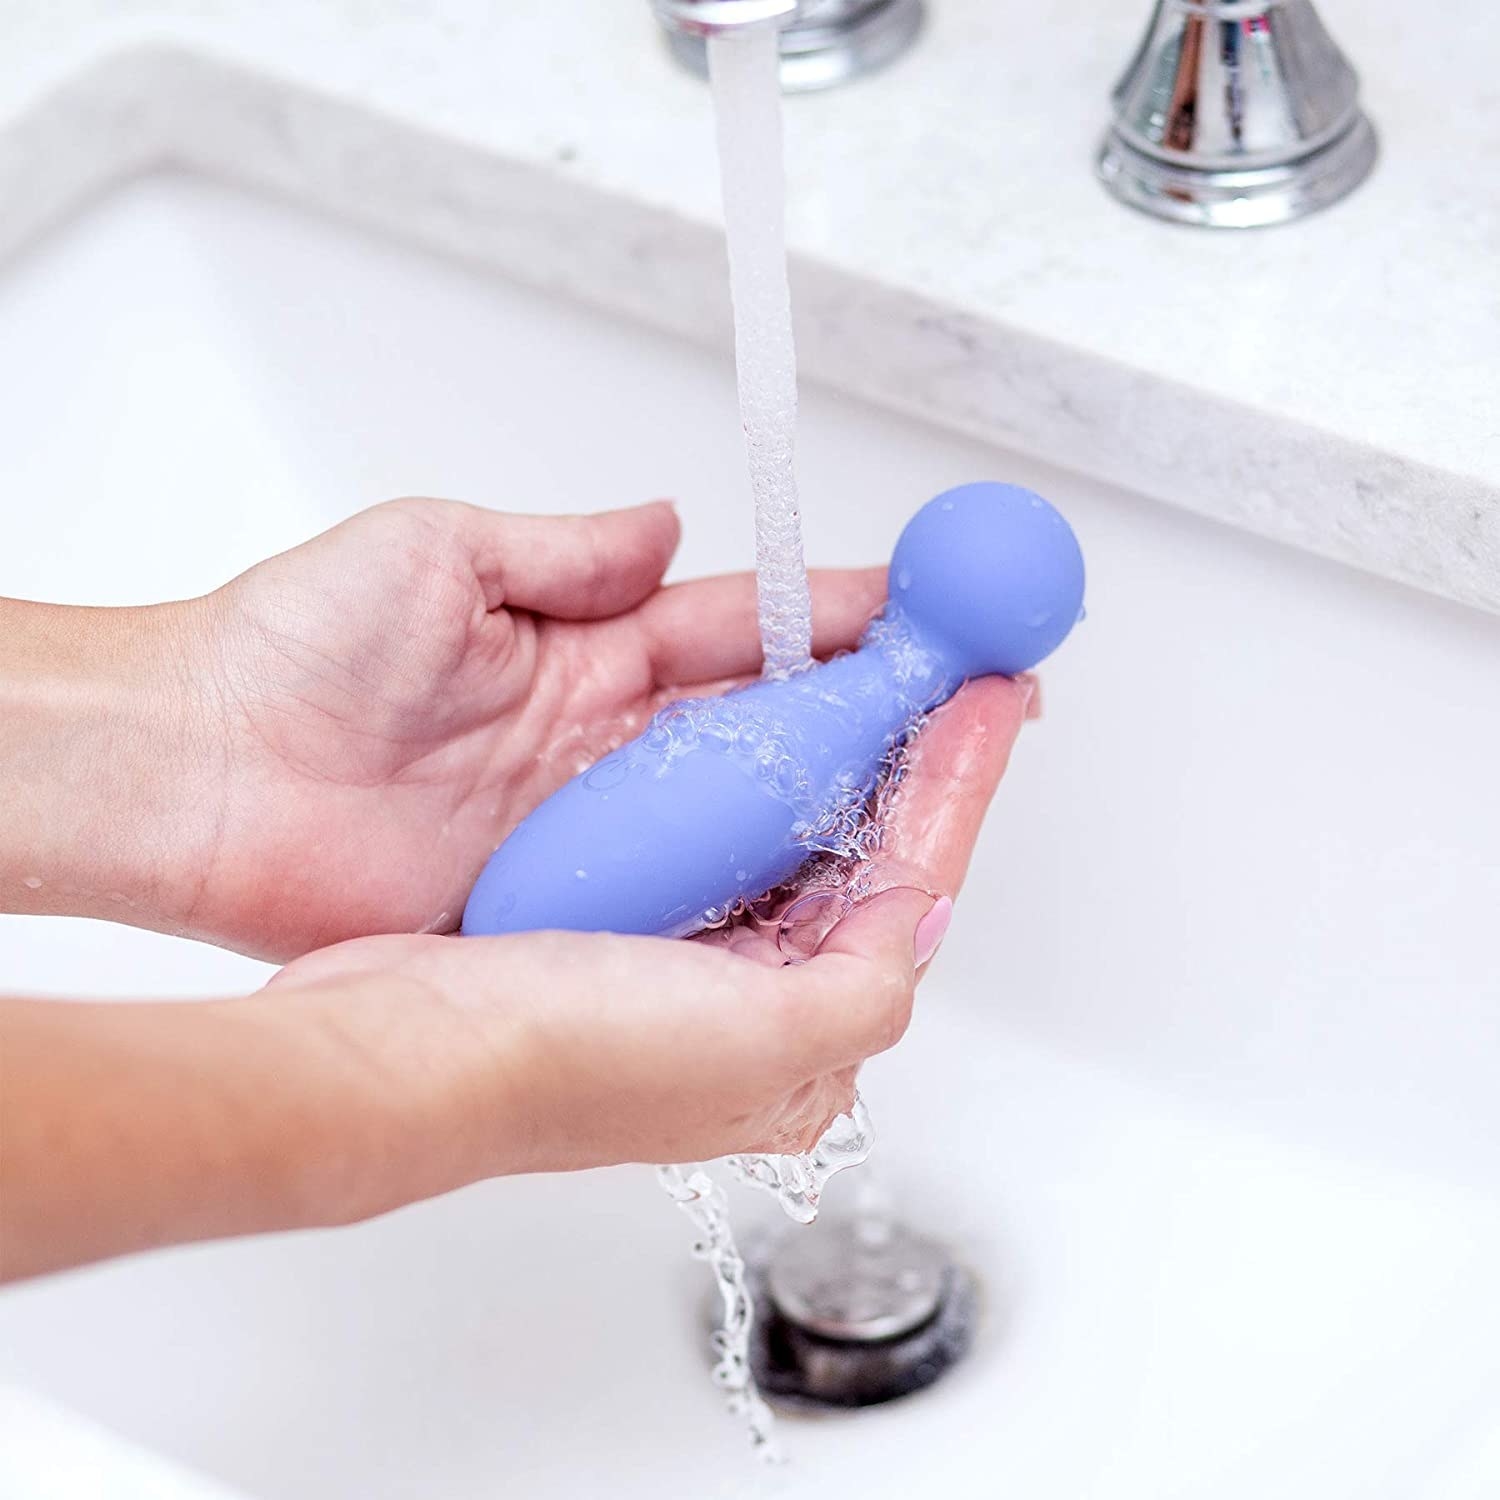 A person washing the vibrator in a sink